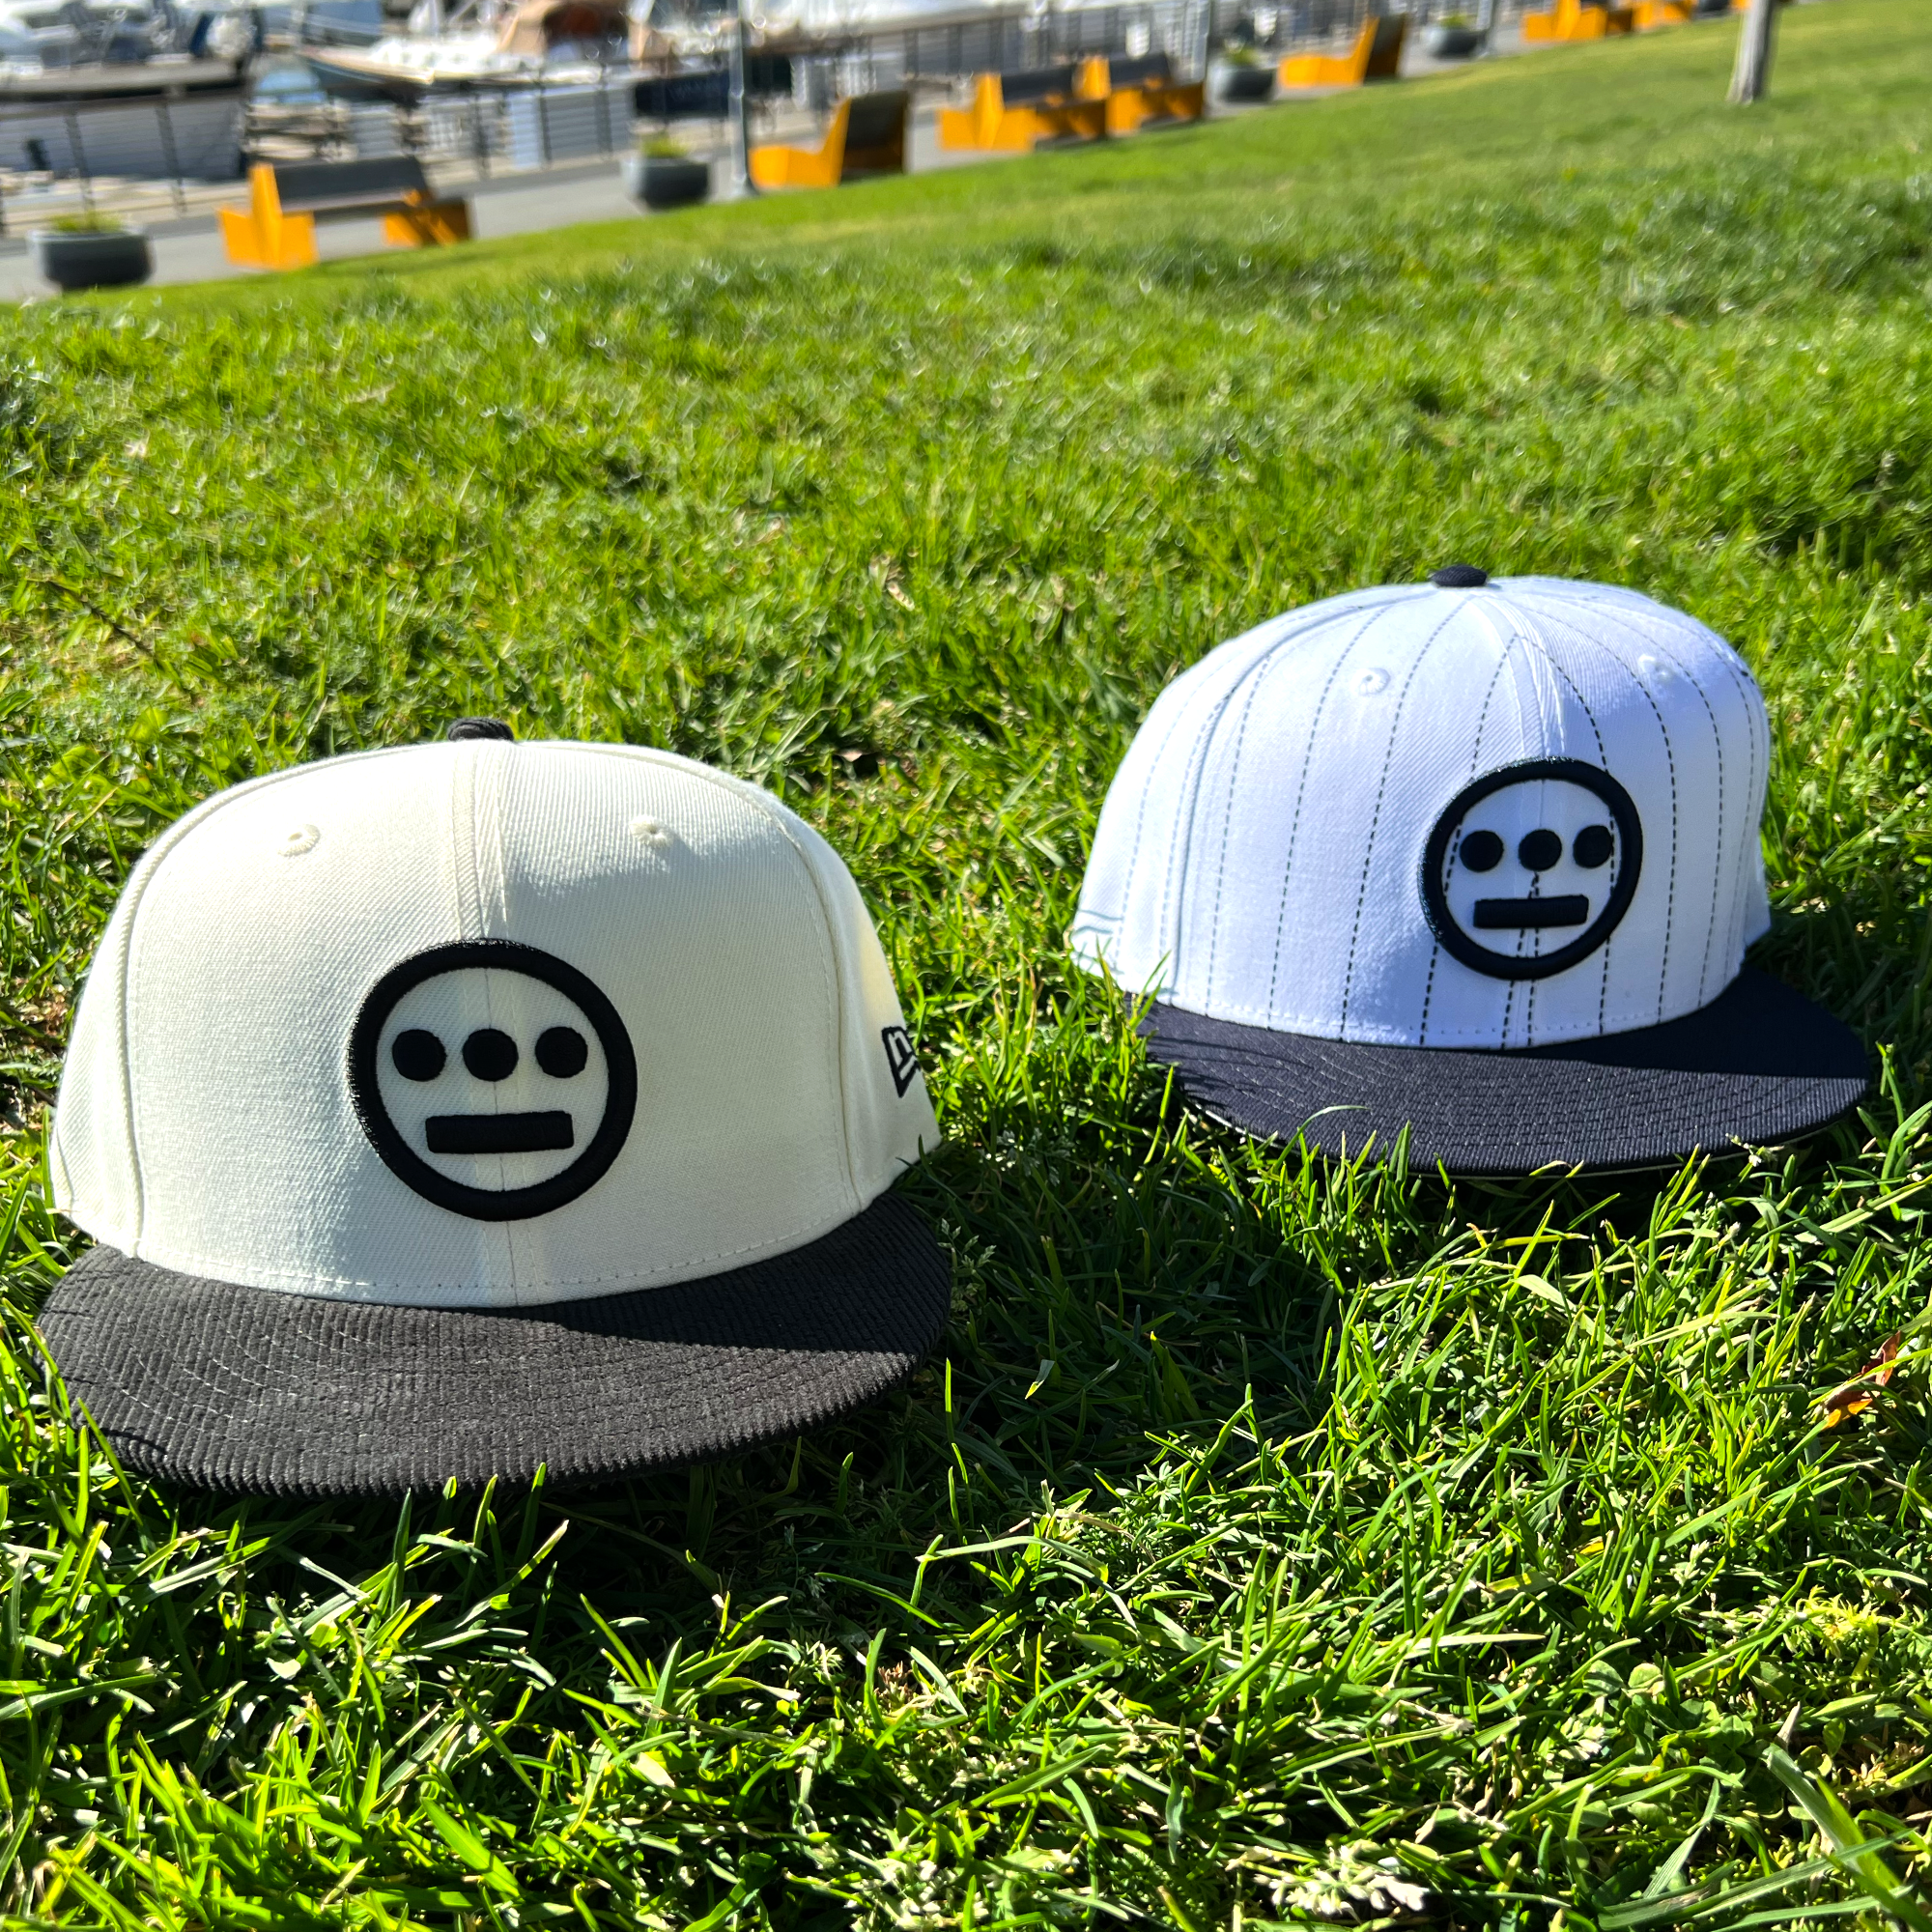 Tow different New Era 59FIFTY Hieroglyphics fitted hats outdoors on grass.